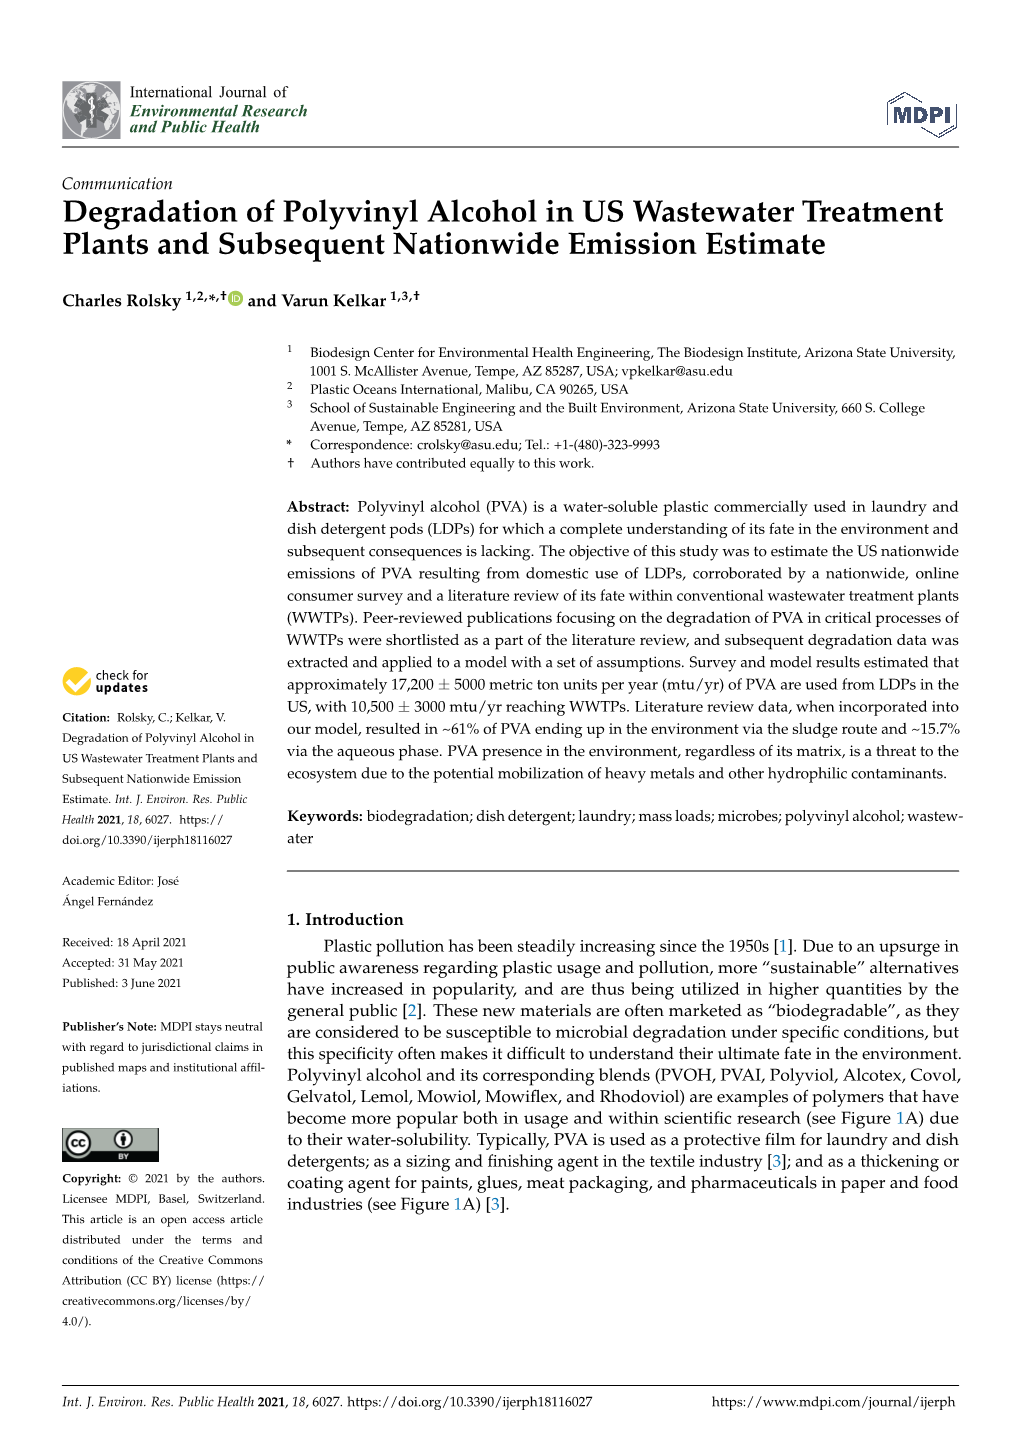 Degradation of Polyvinyl Alcohol in US Wastewater Treatment Plants and Subsequent Nationwide Emission Estimate